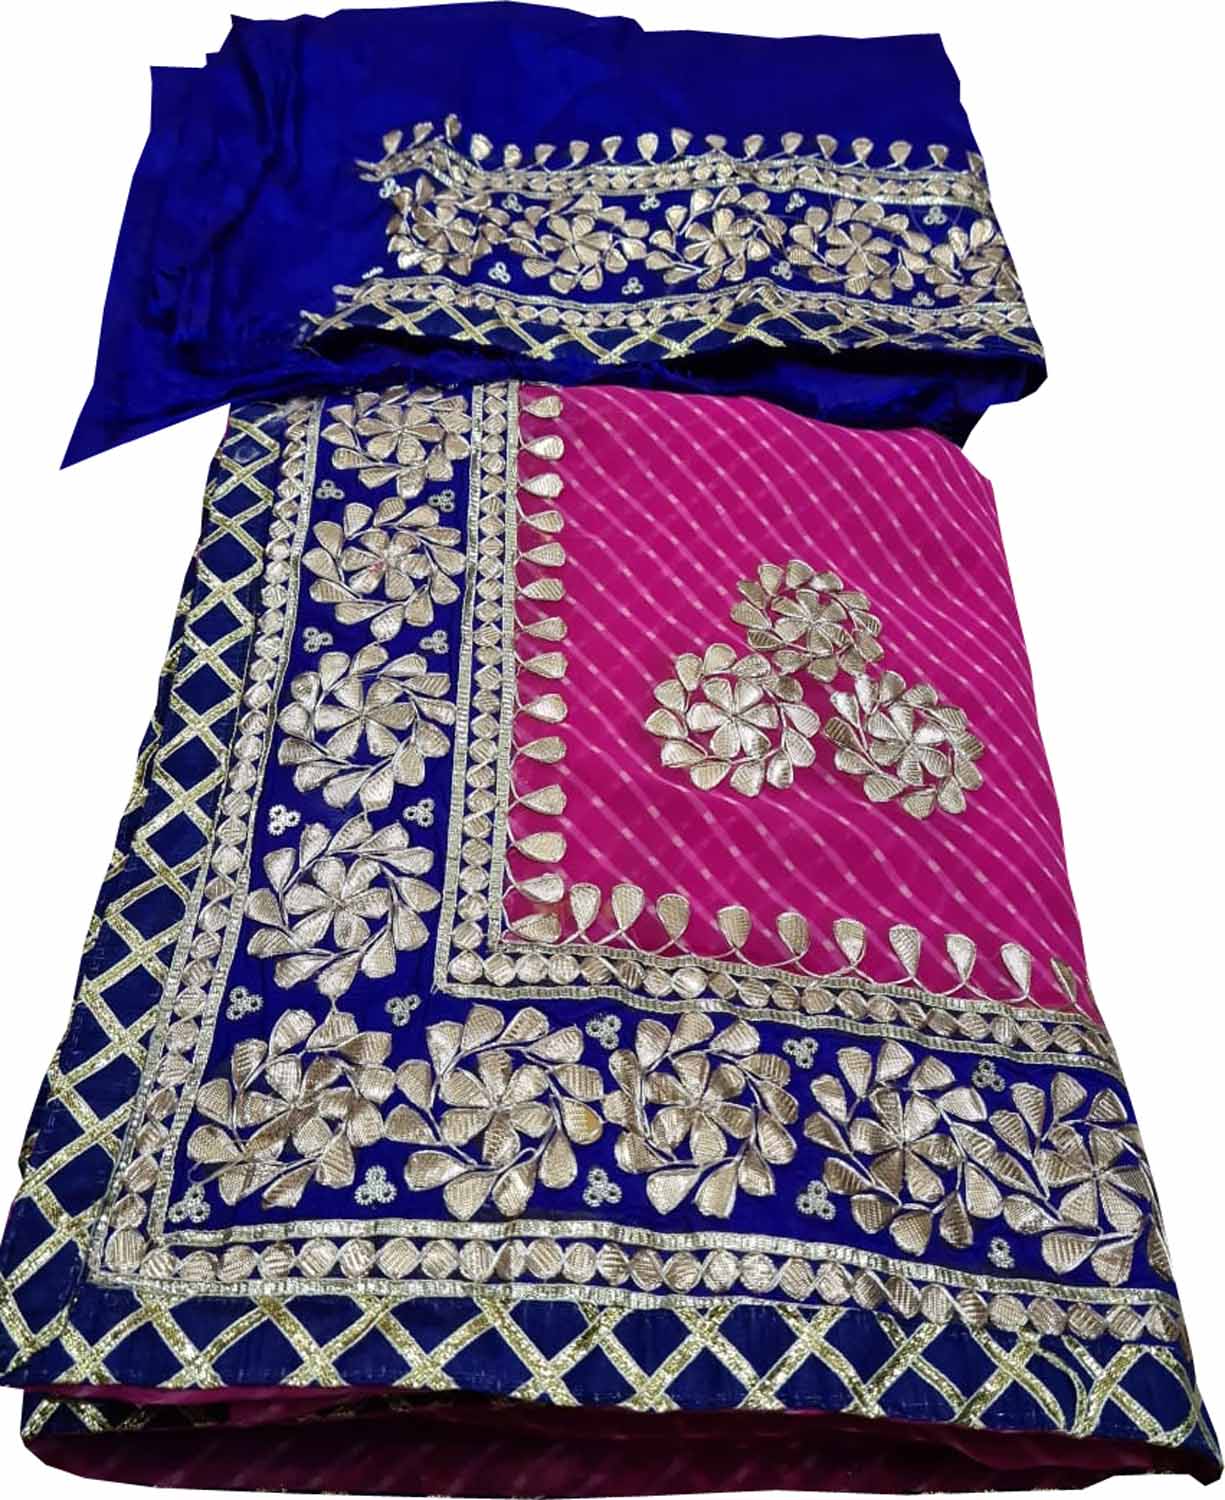 Stunning Pink and Blue Gota Patti Georgette Saree for Elegant Occasions - Luxurion World